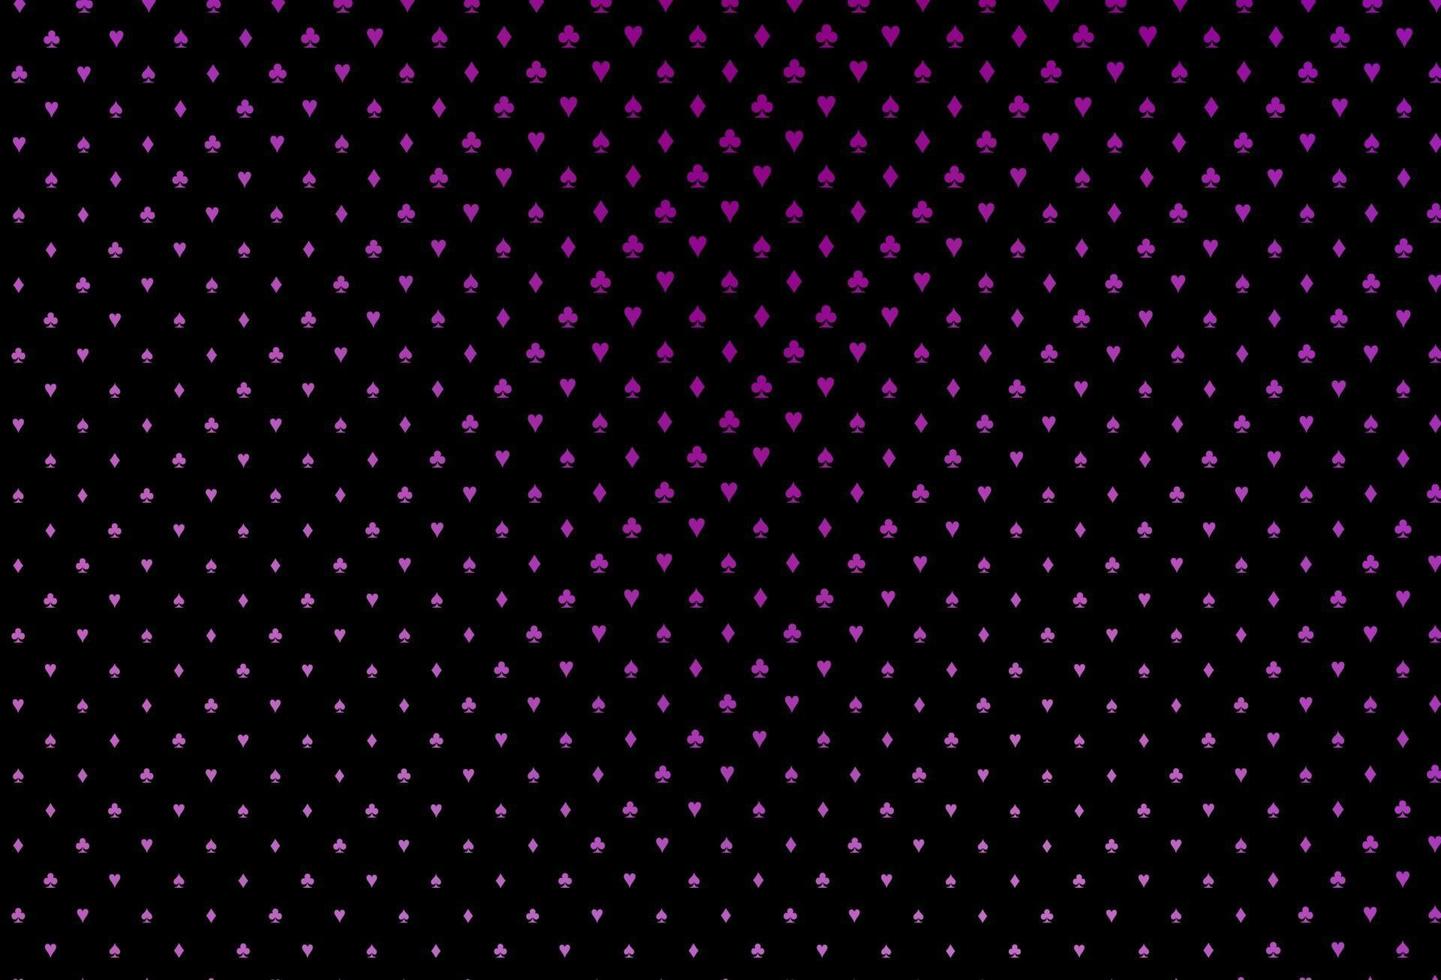 Dark purple vector background with cards signs.